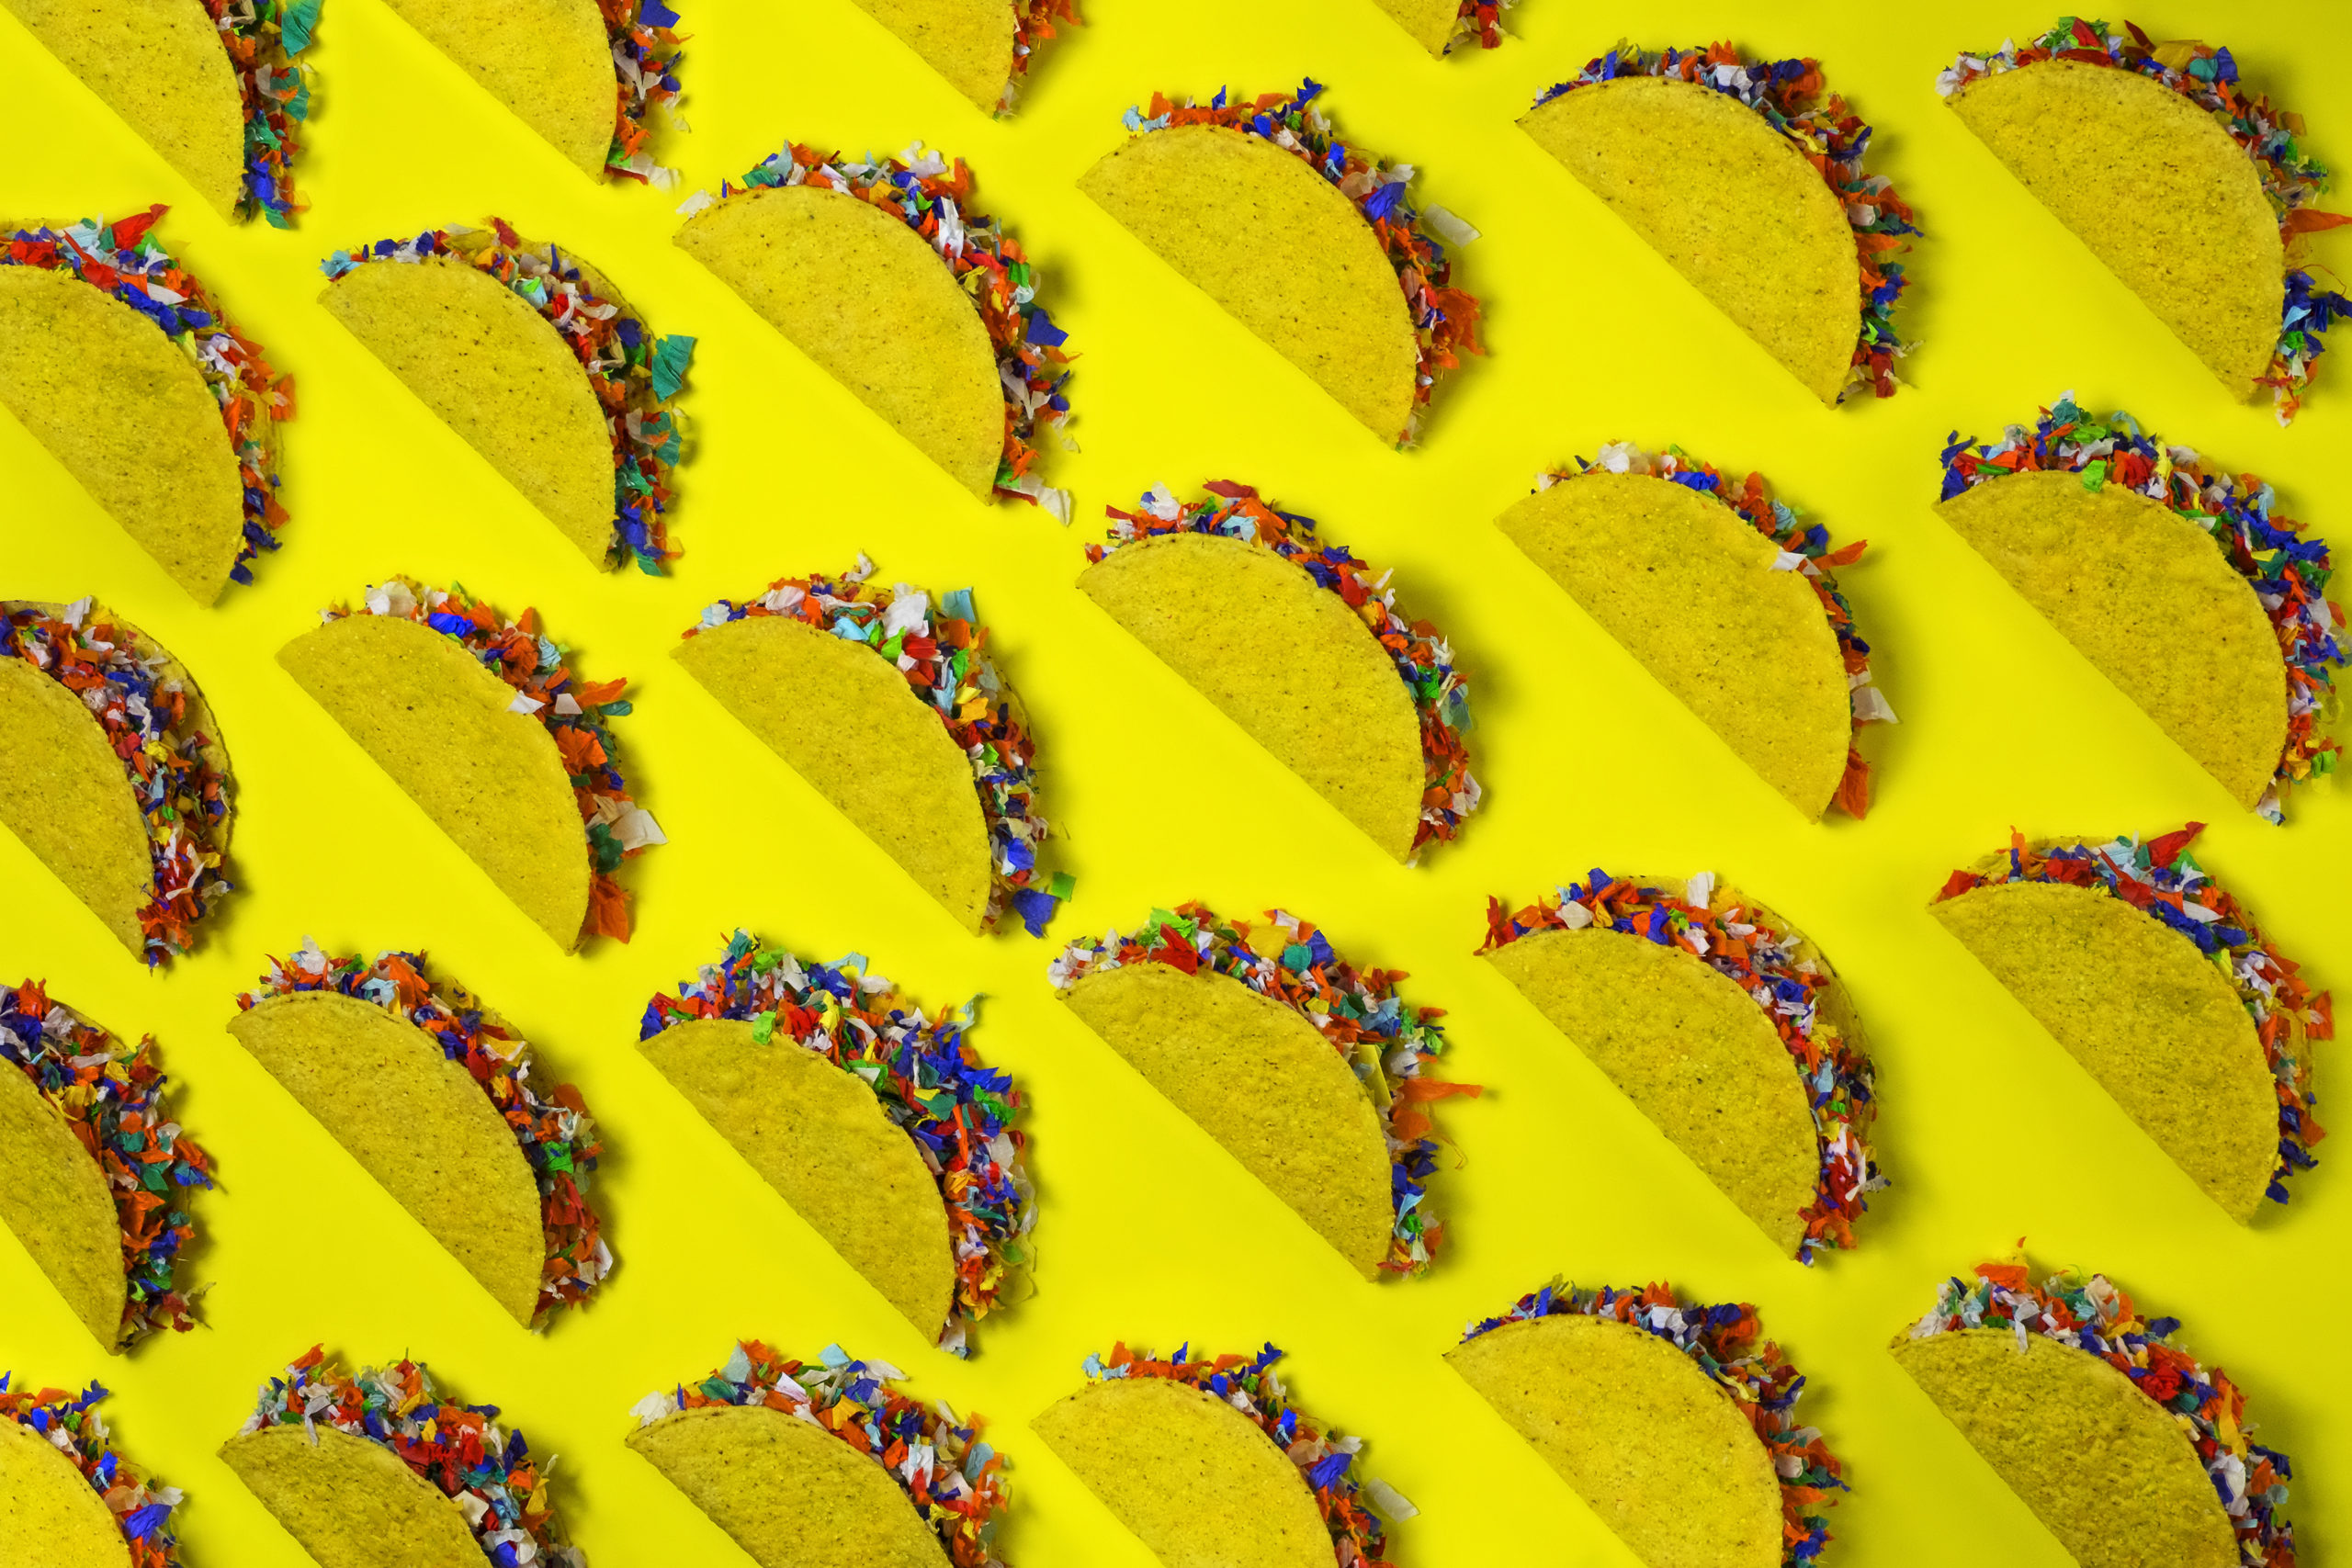 Rows of taco shells stuffed with colorful confetti - taco party concept